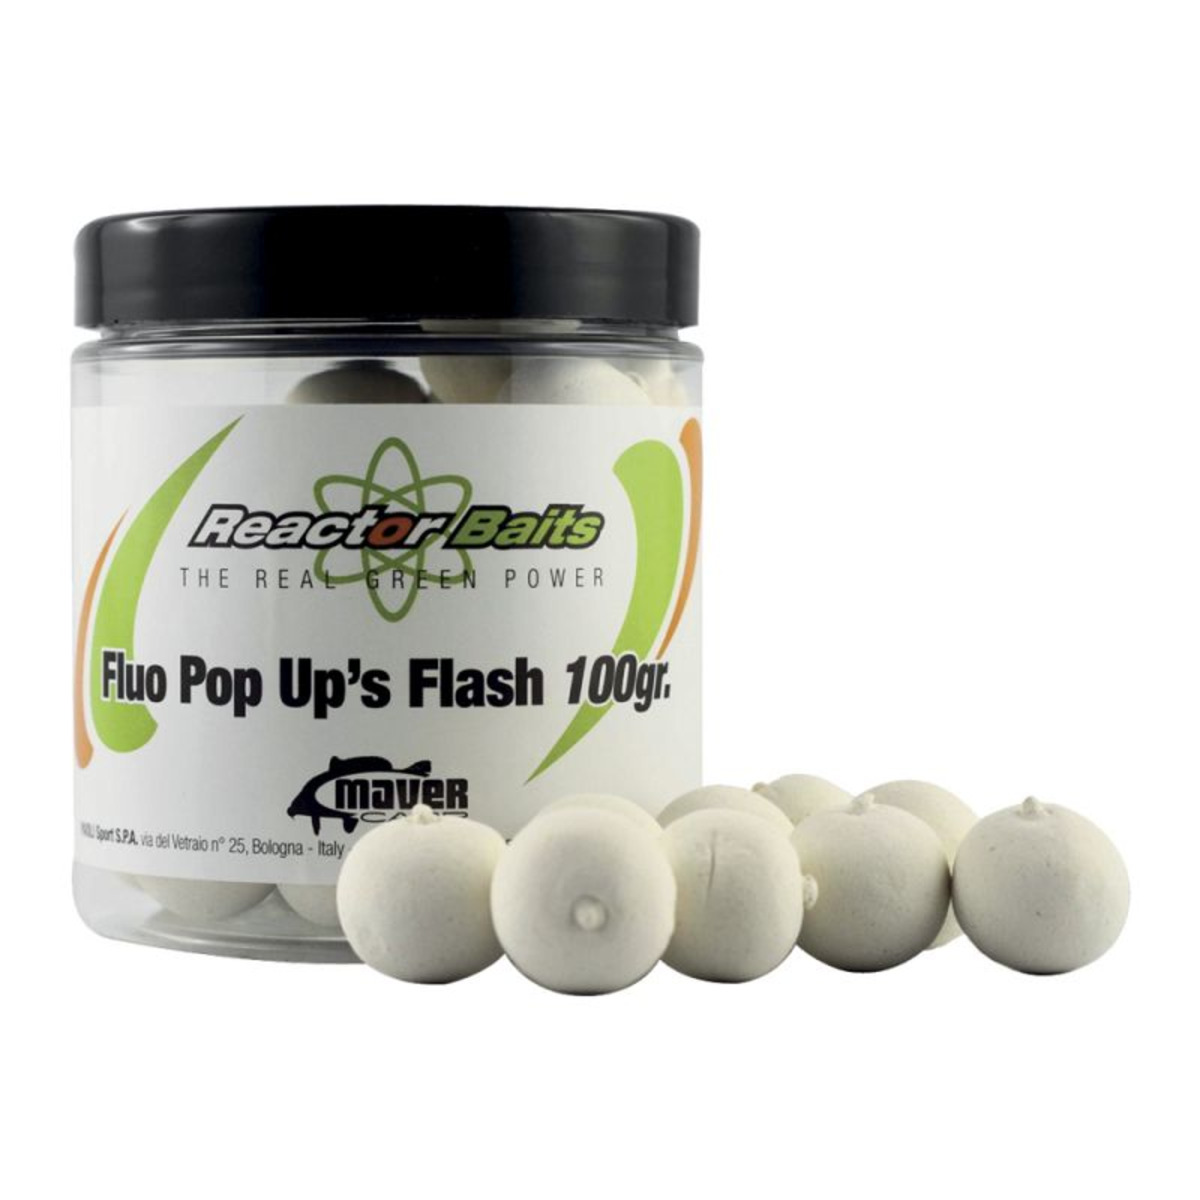 Reactor Baits Pop Up Flash Fluo Neutral Flavour - White Fluo - 15 mm